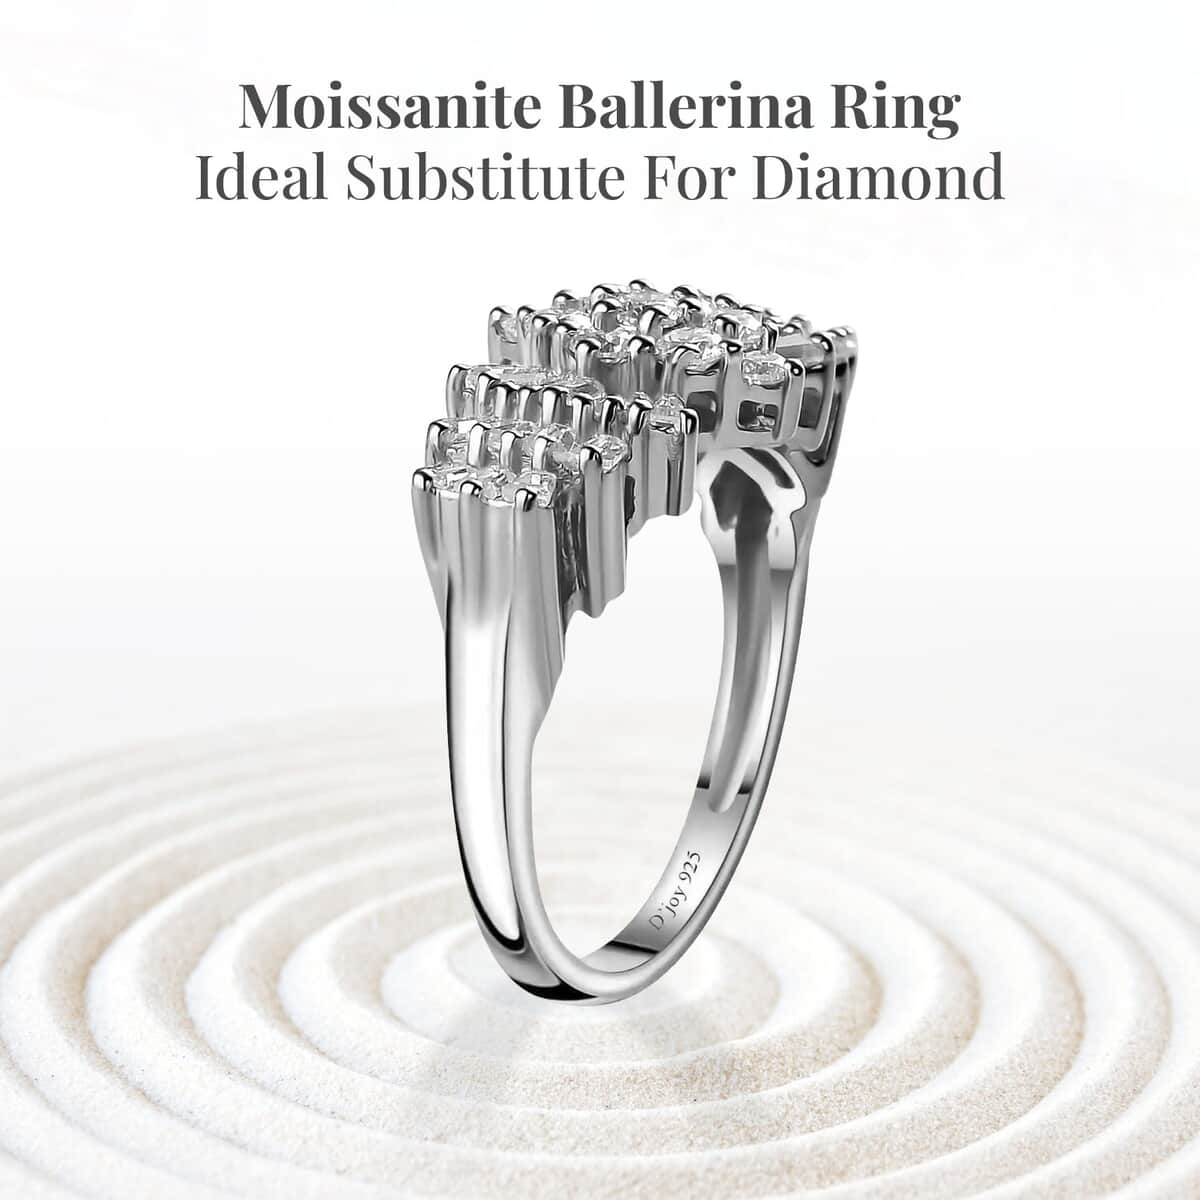 Moissanite Ballerina Ring in Vermeil RG Over Sterling Silver (Size 7.0) (Del. in 10-15 Days) image number 3